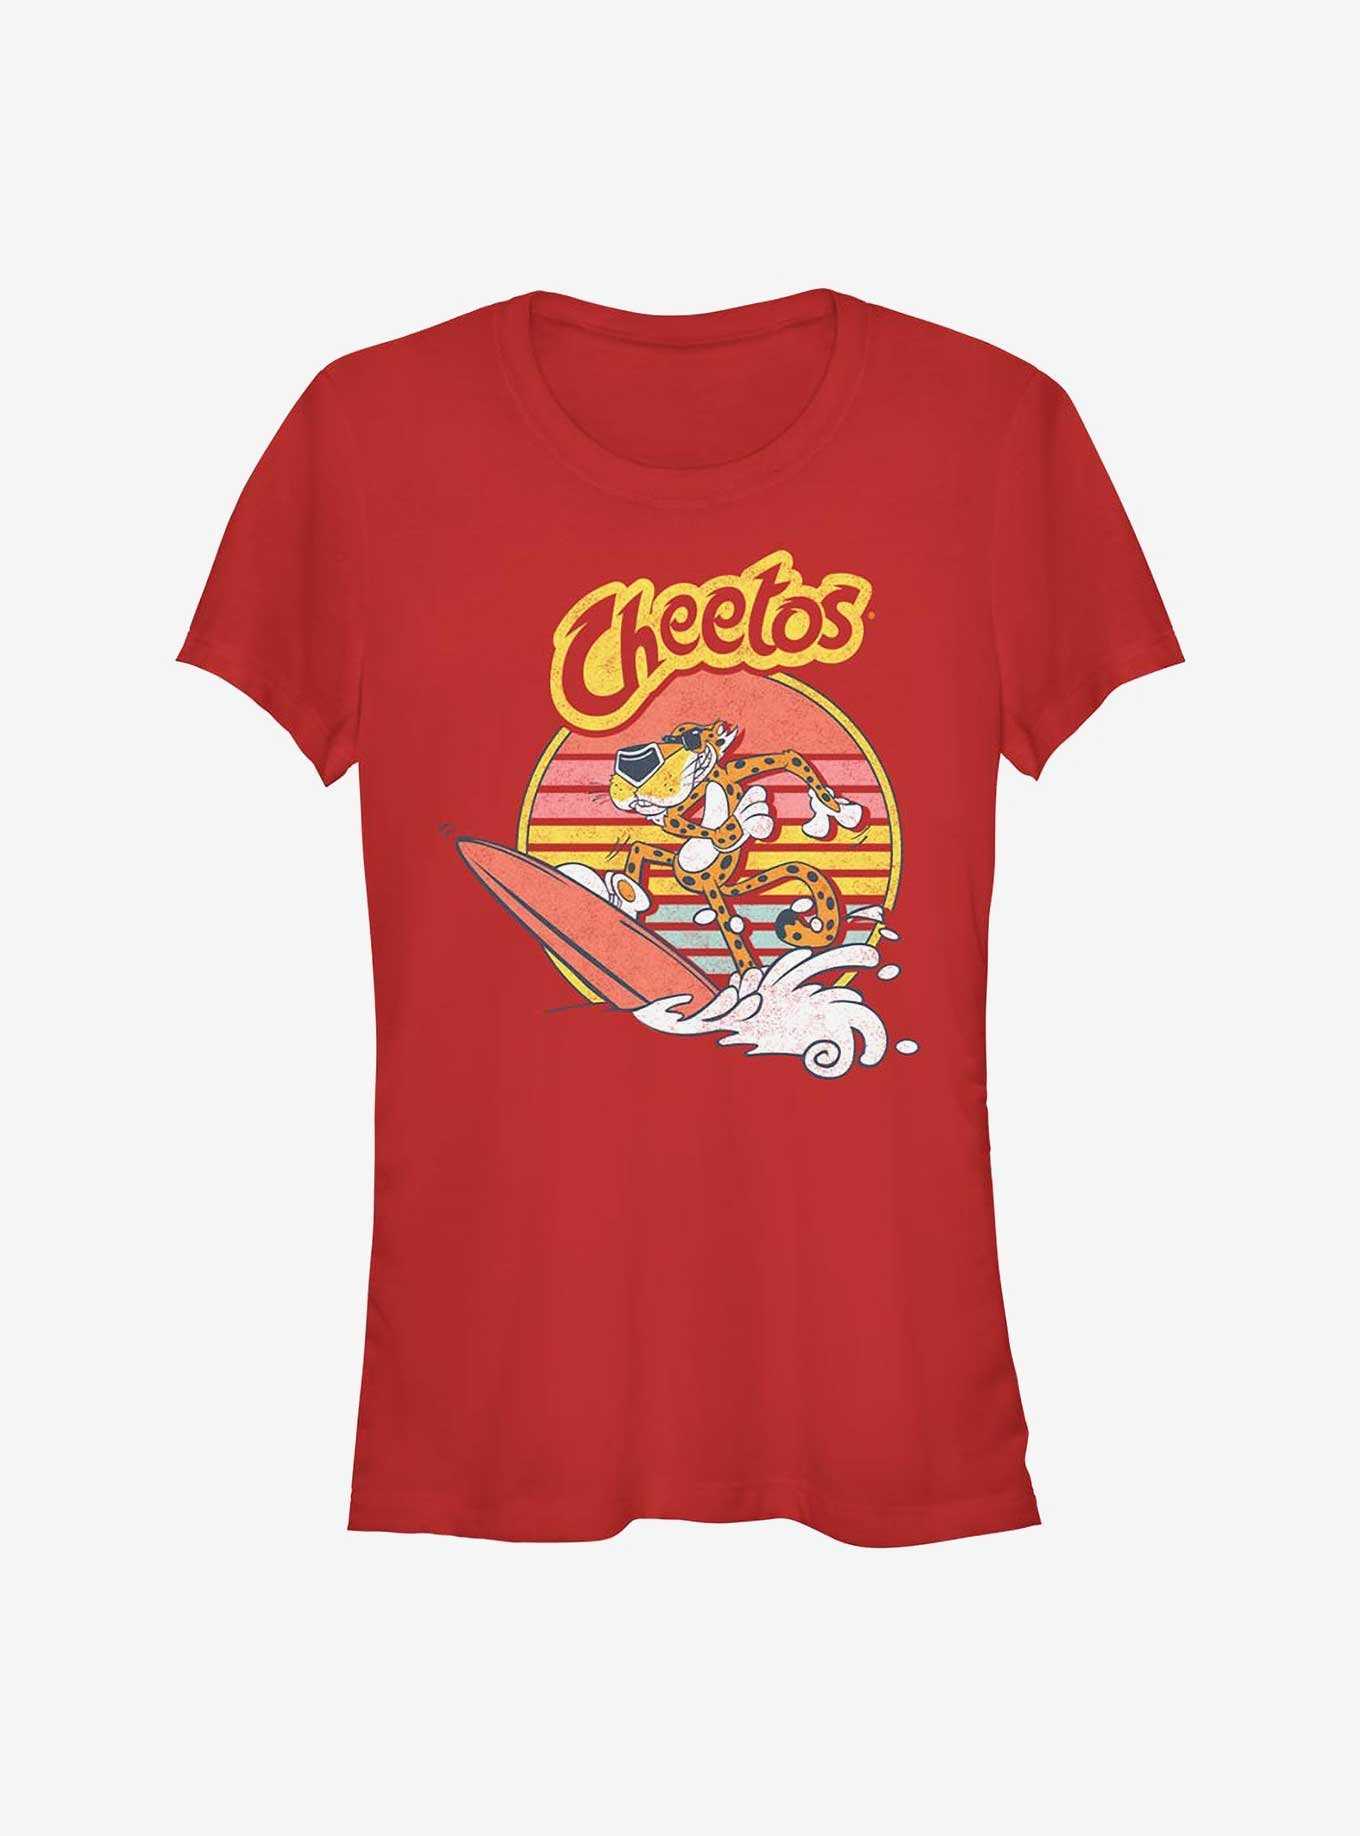 Cheetos Surfing Chester Catching Waves Girls T-Shirt, , hi-res